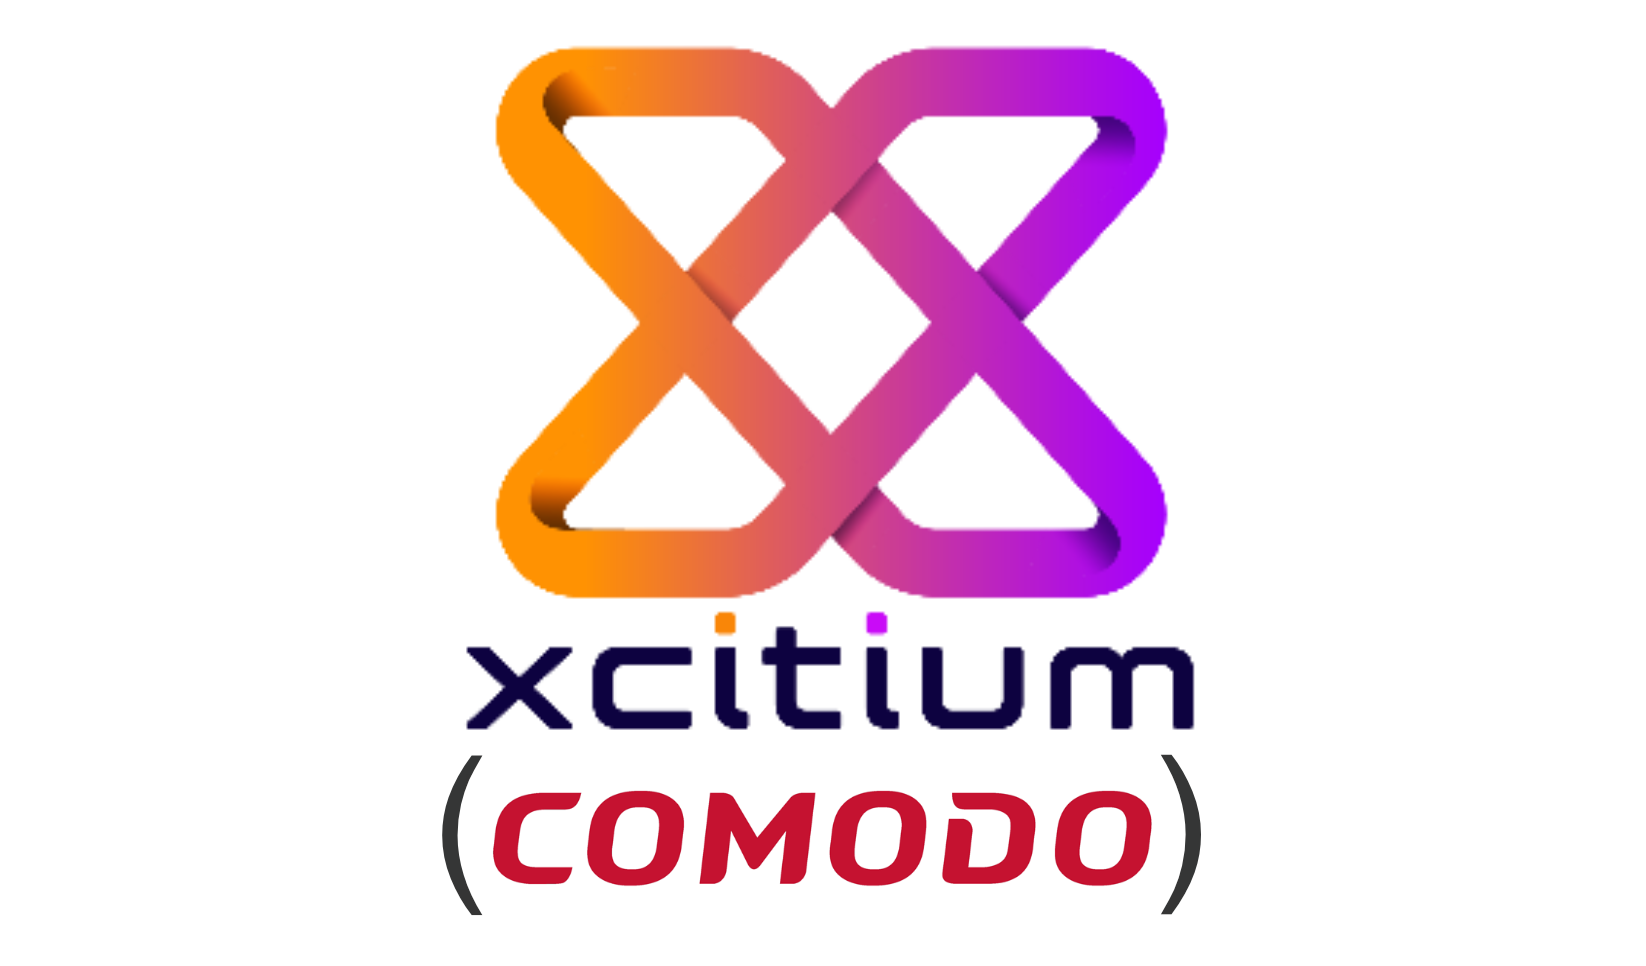 Xcitium (Comodo) Endpoint Protection XDR